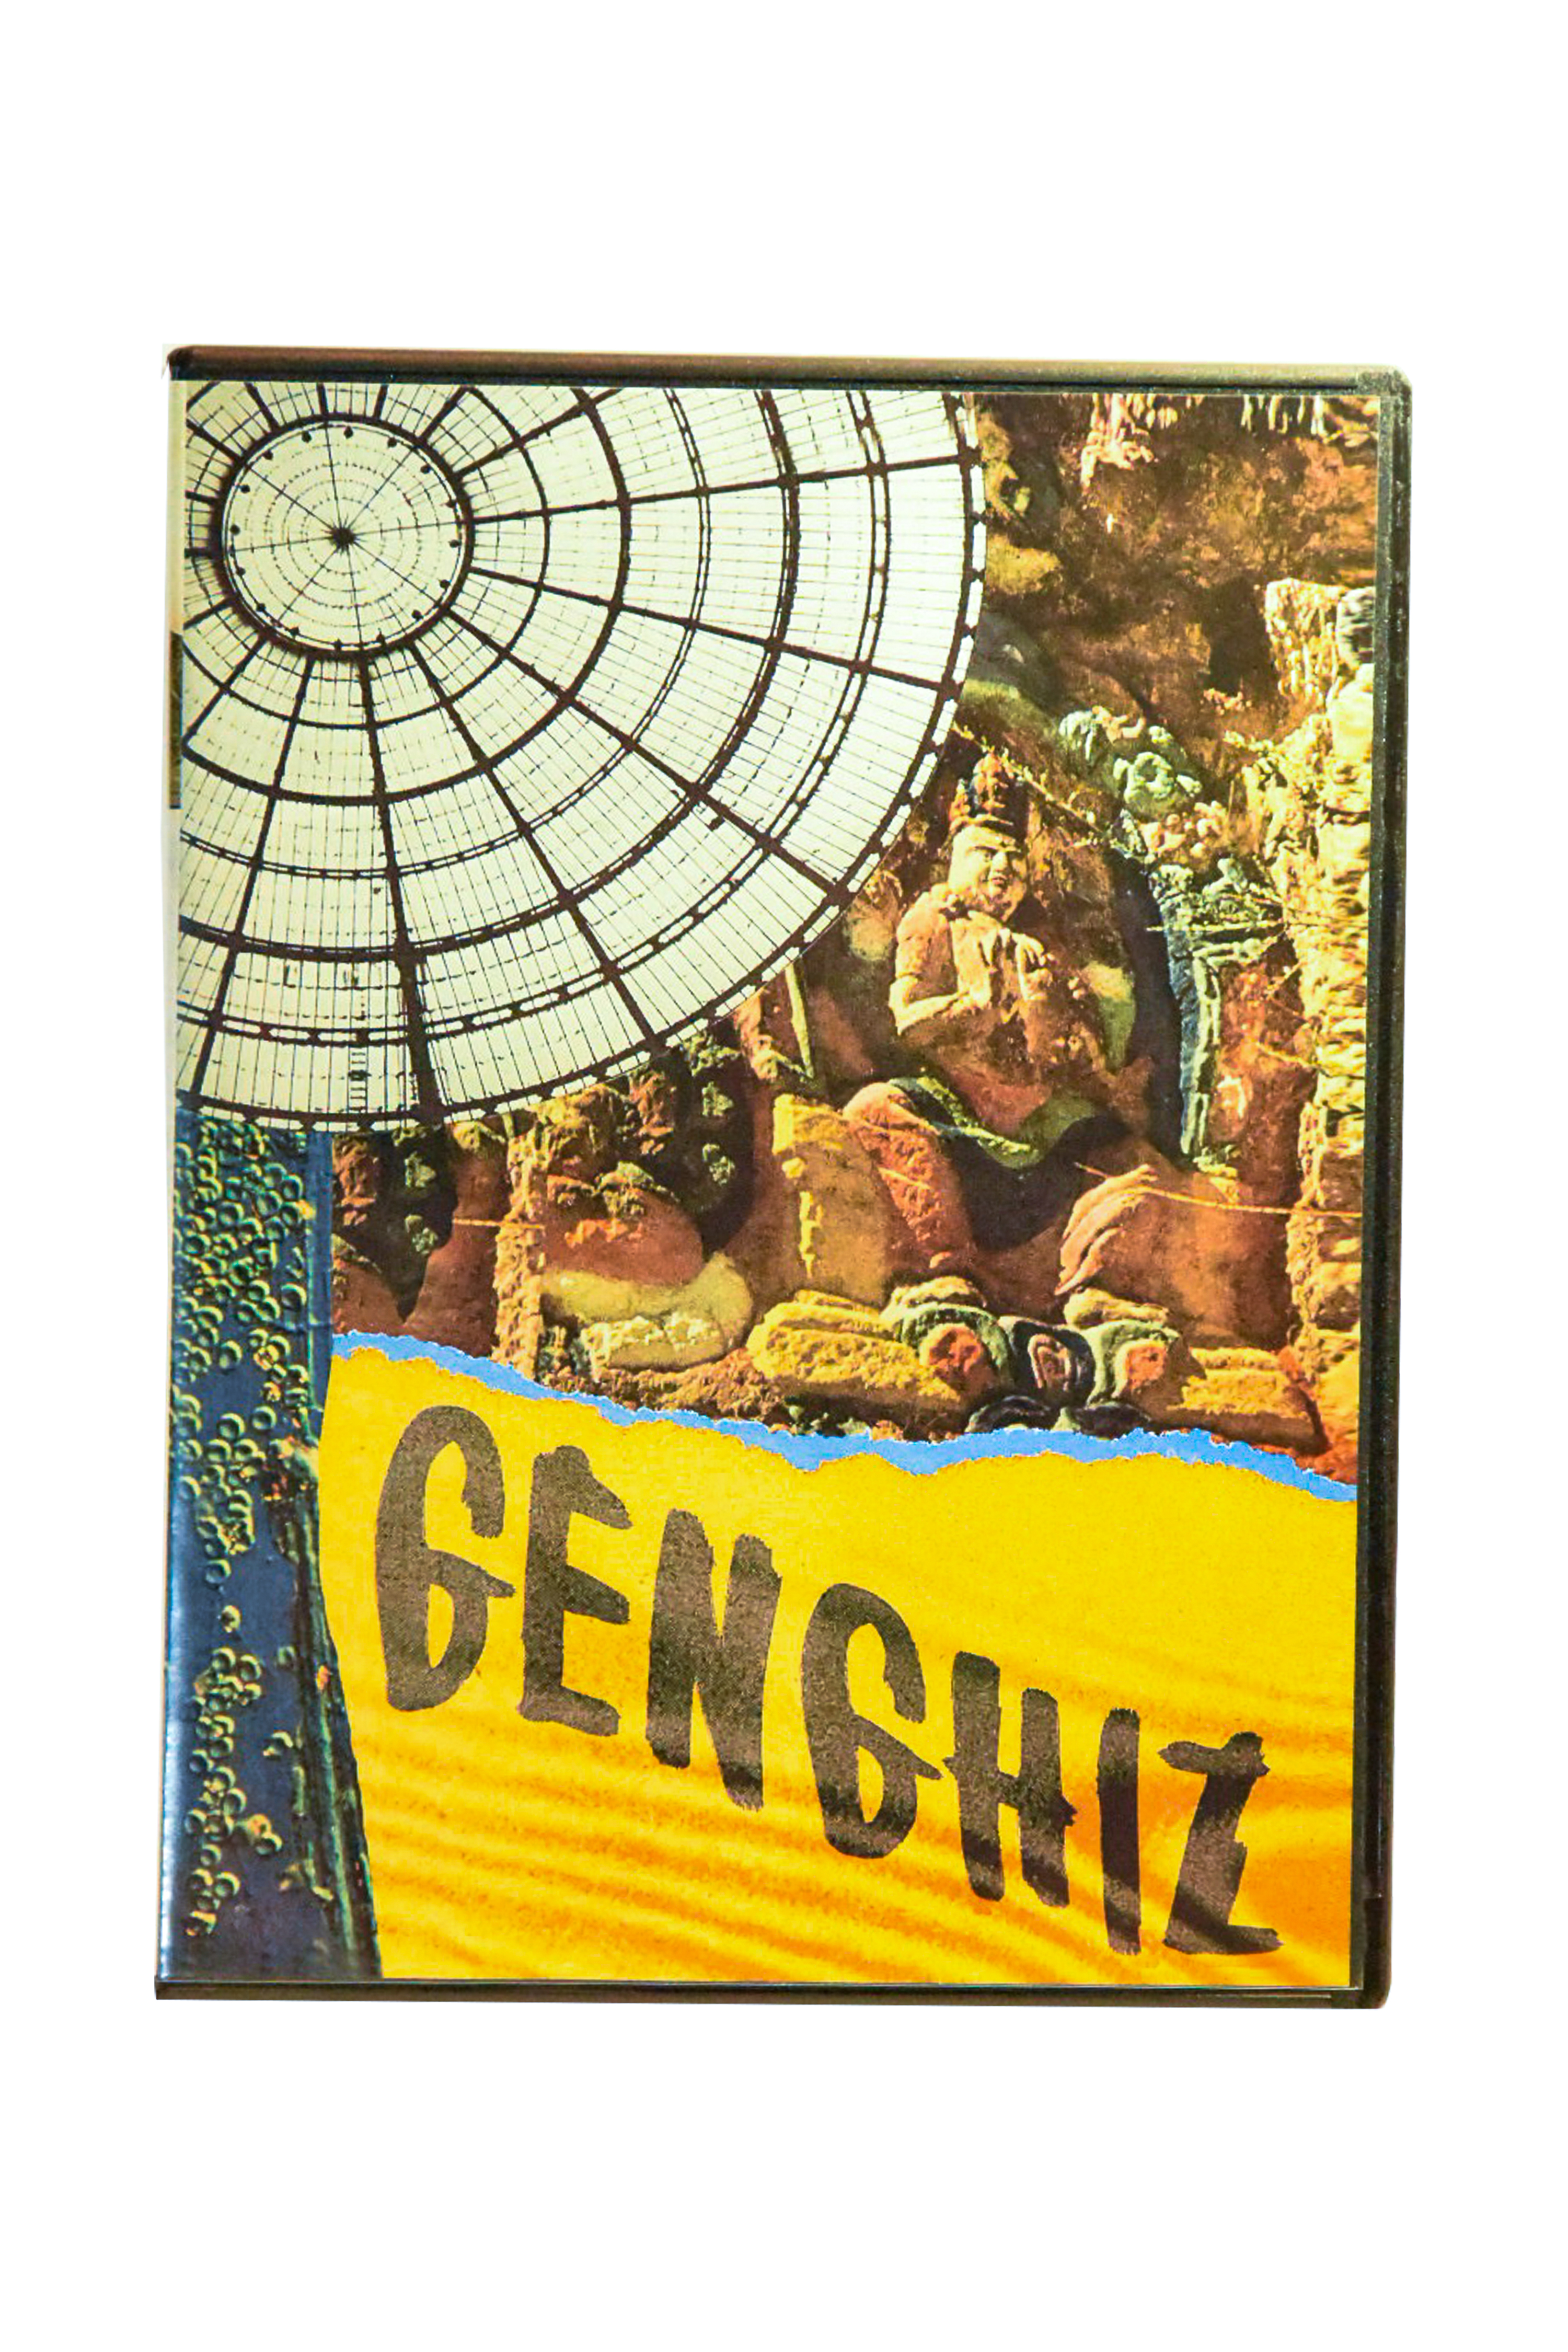 Genghiz cover